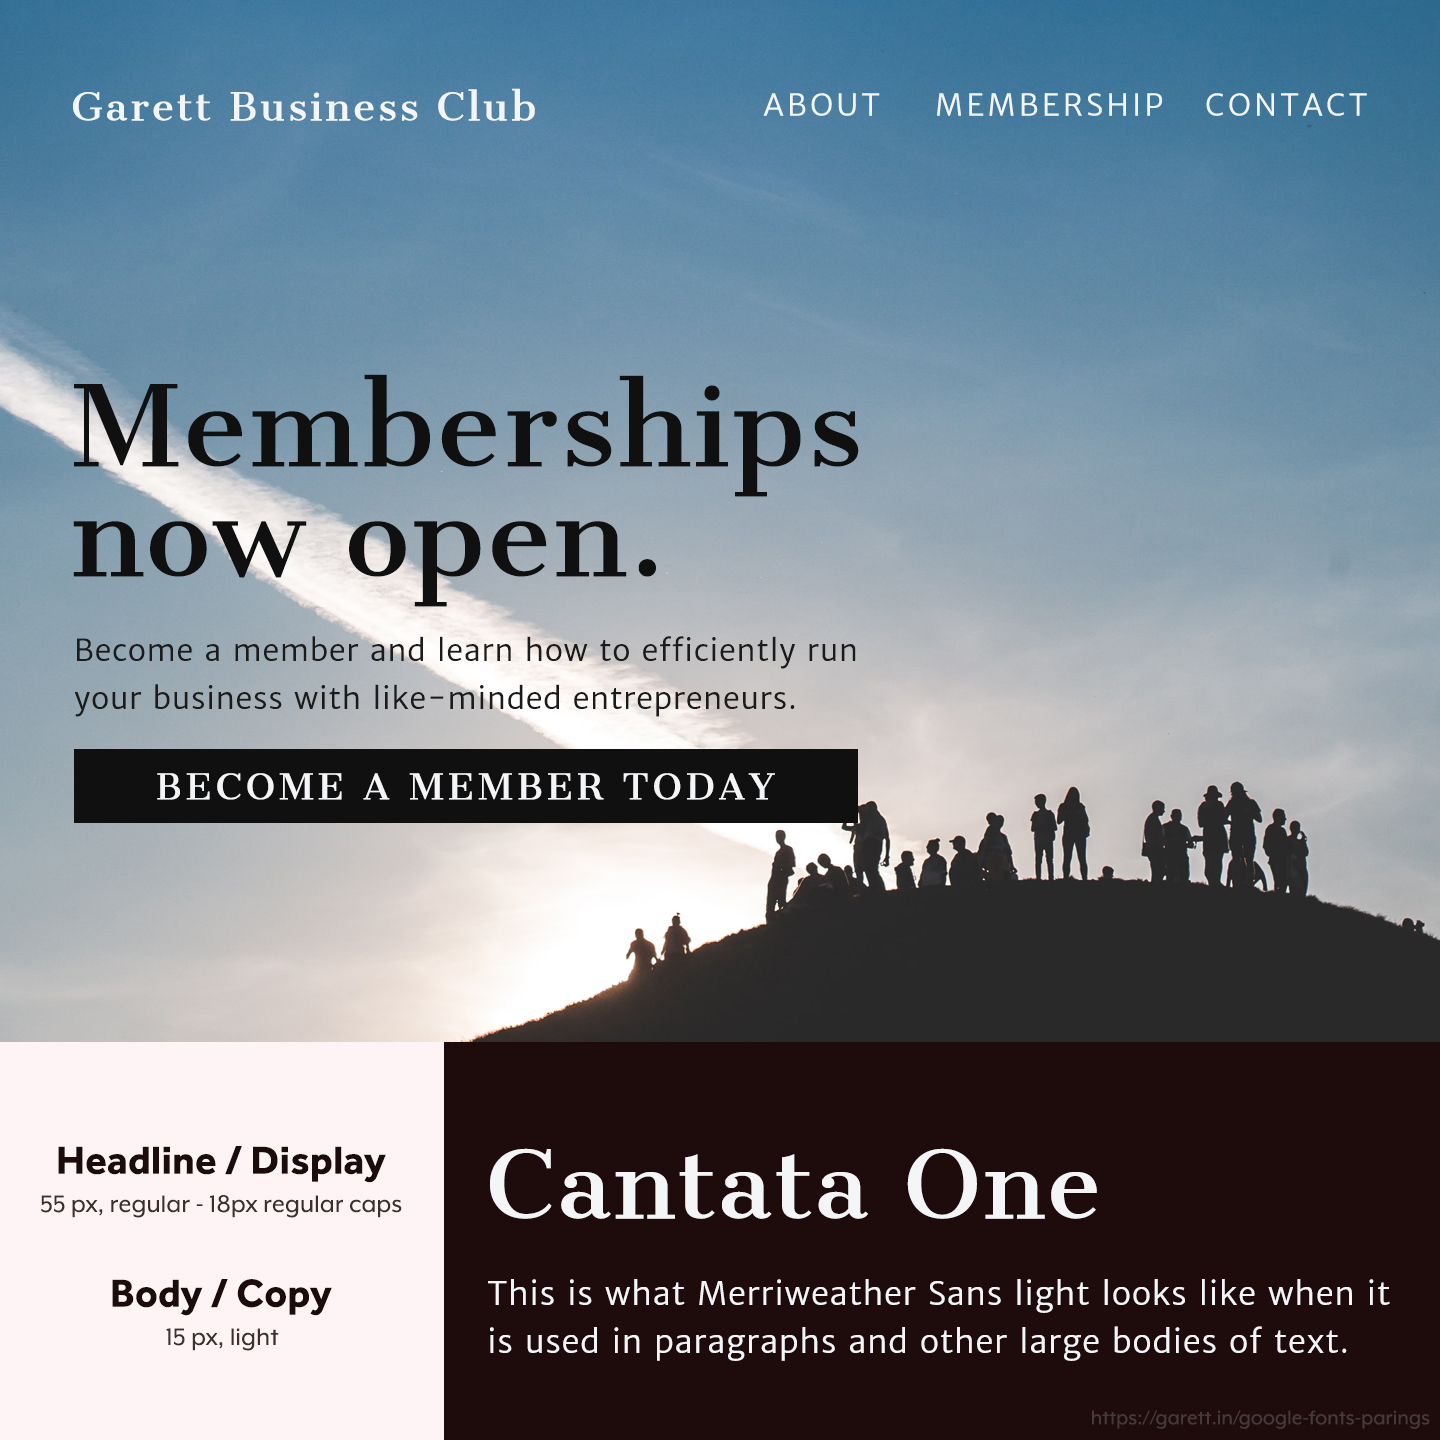 Cantata One and Merriweather Sans font pairing - 30 Google Font Pairings for Your Brand and Website